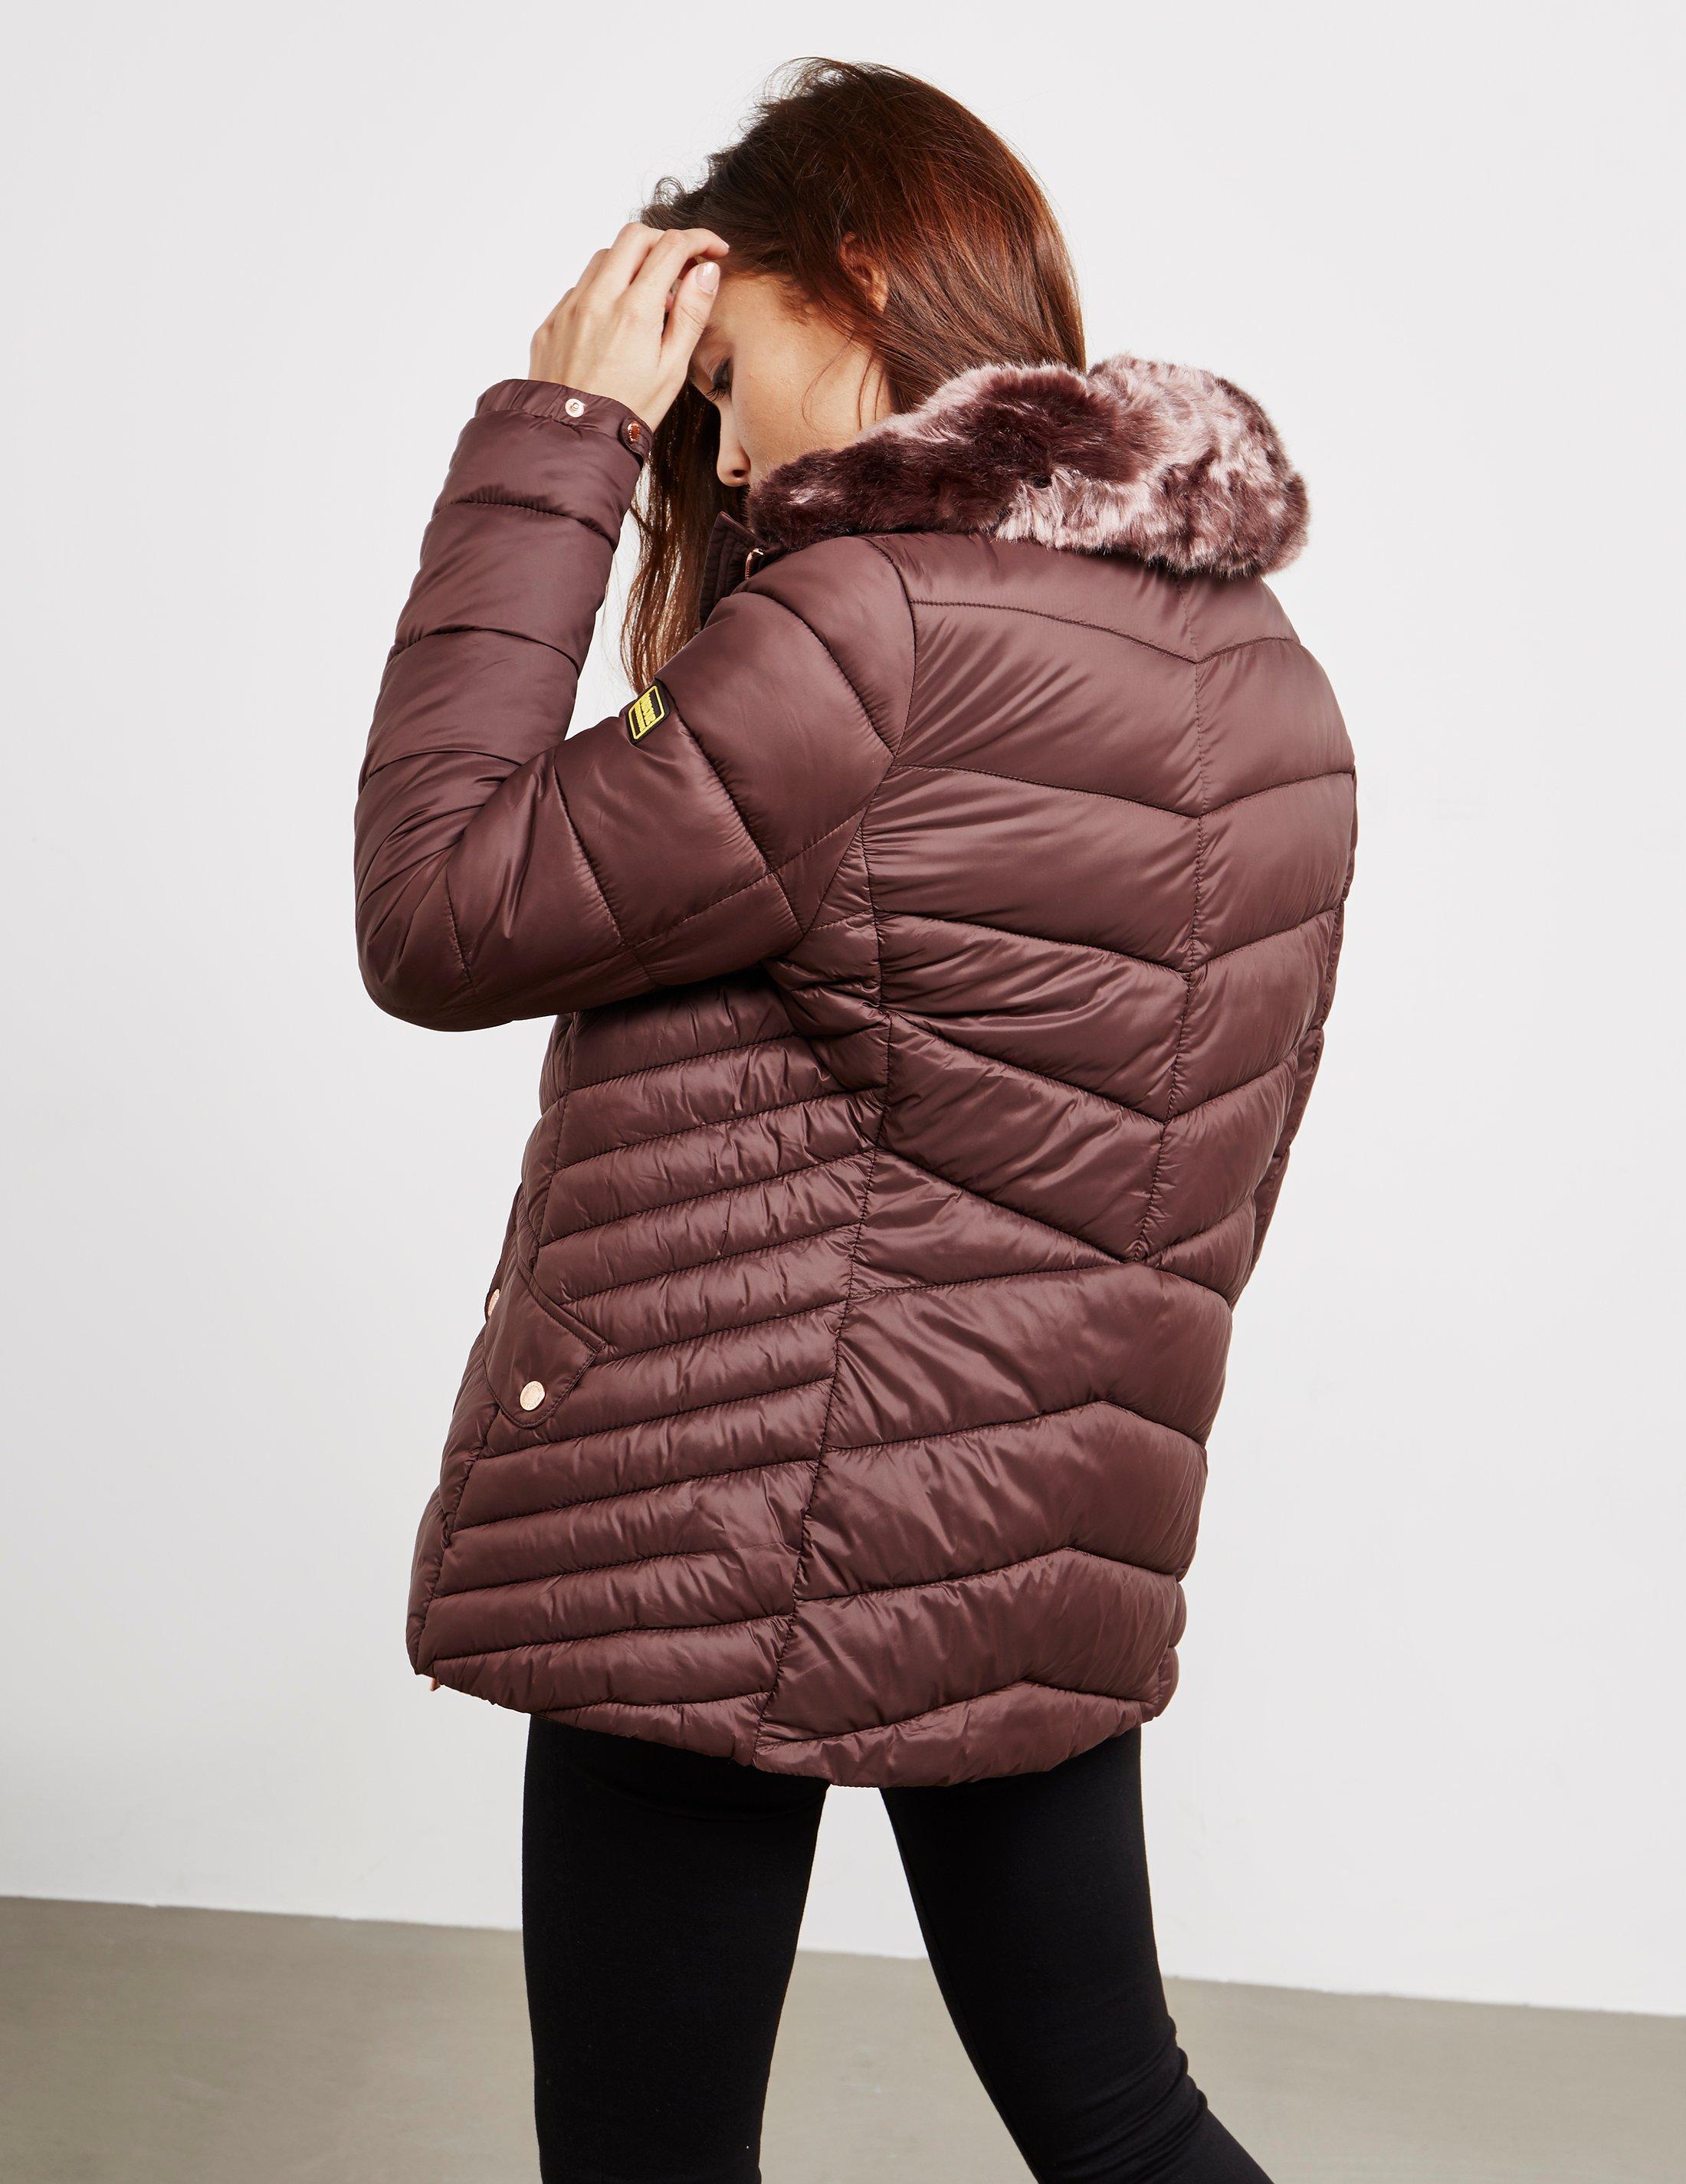 barbour autocross quilted jacket